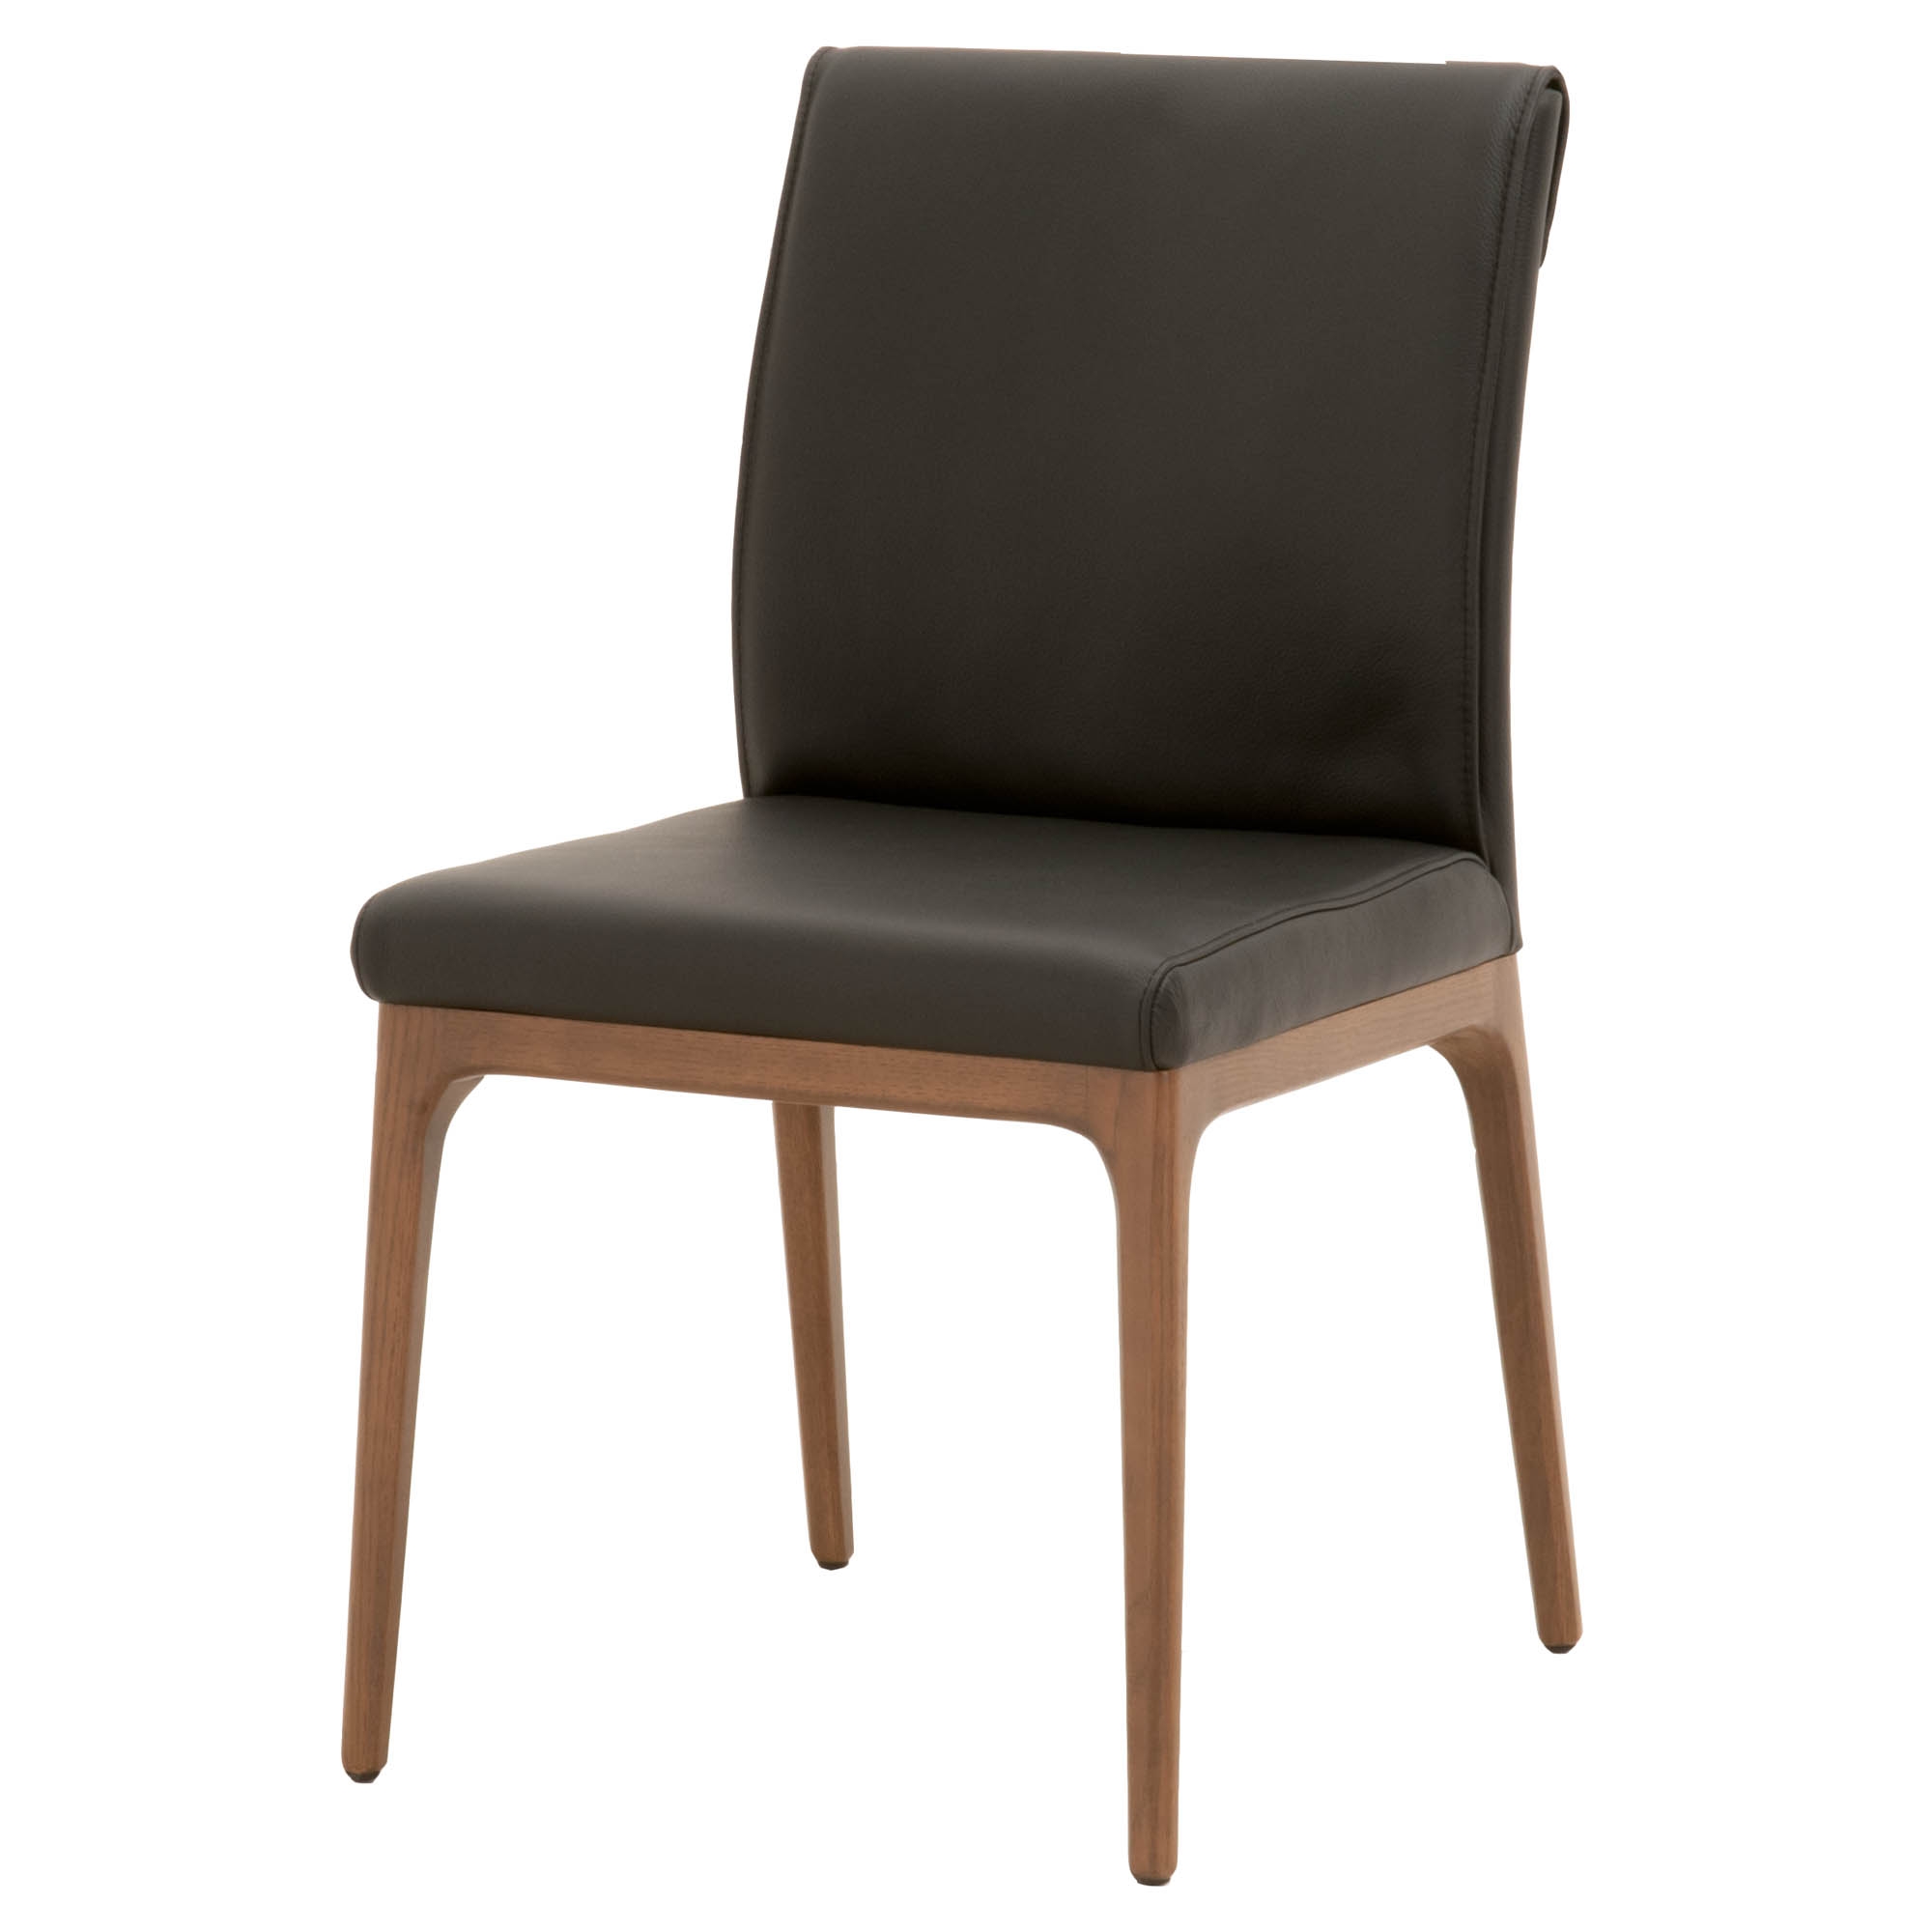 Alex Dining Chair, Sable Top Grain Leather, Set of 2 - Image 1